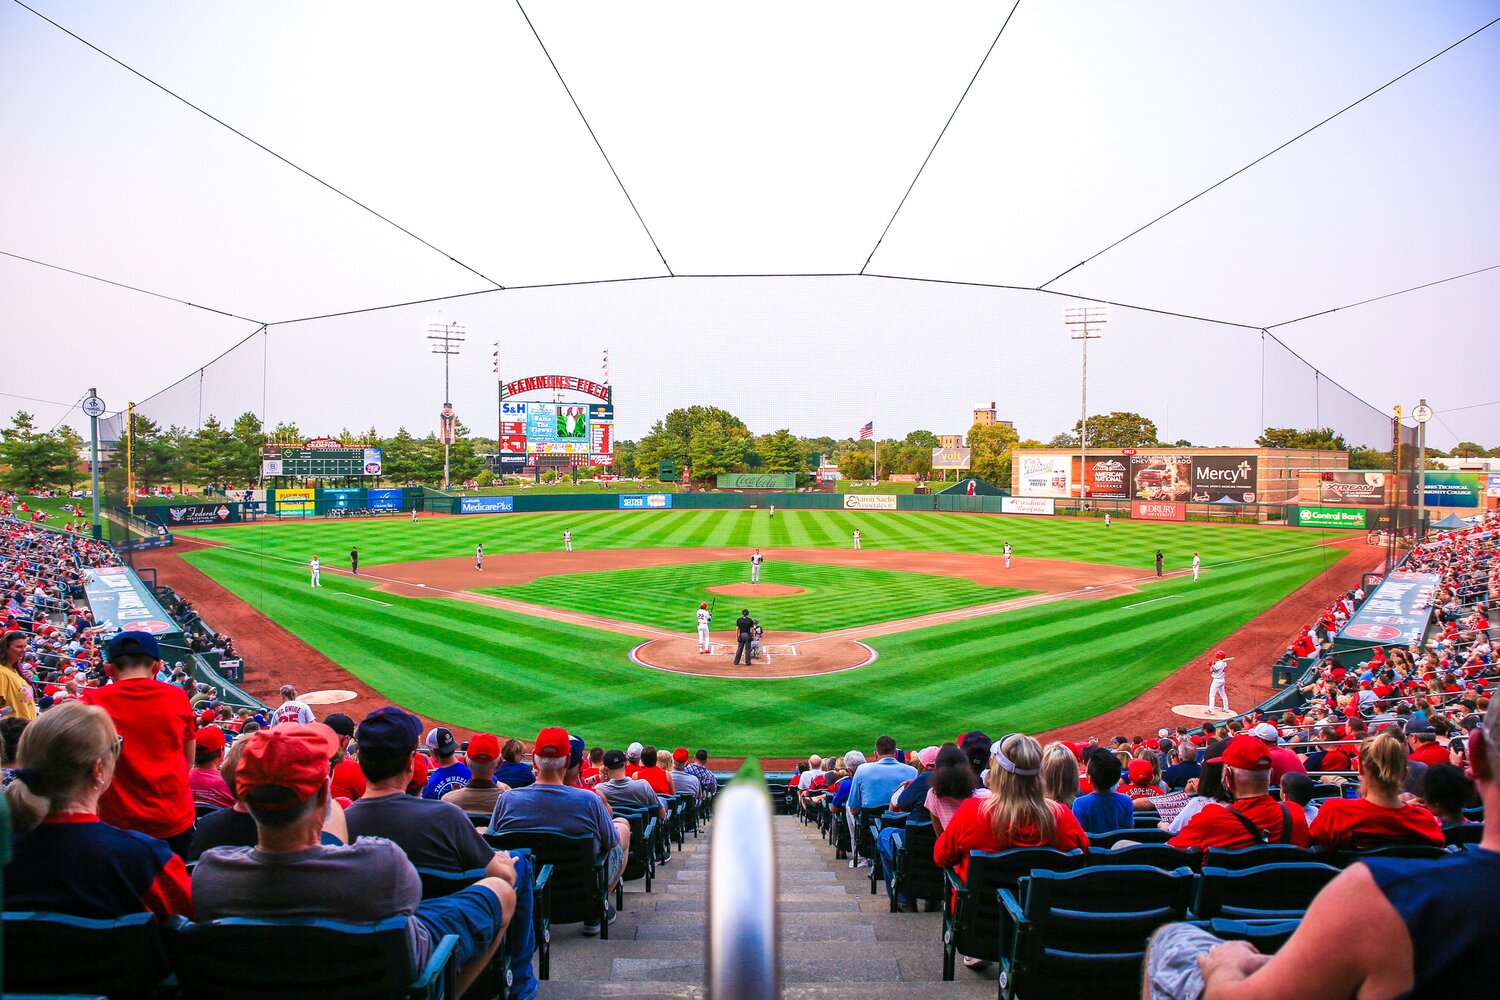 The Springfield Cardinals team is now owned by Diamond Baseball Holdings.